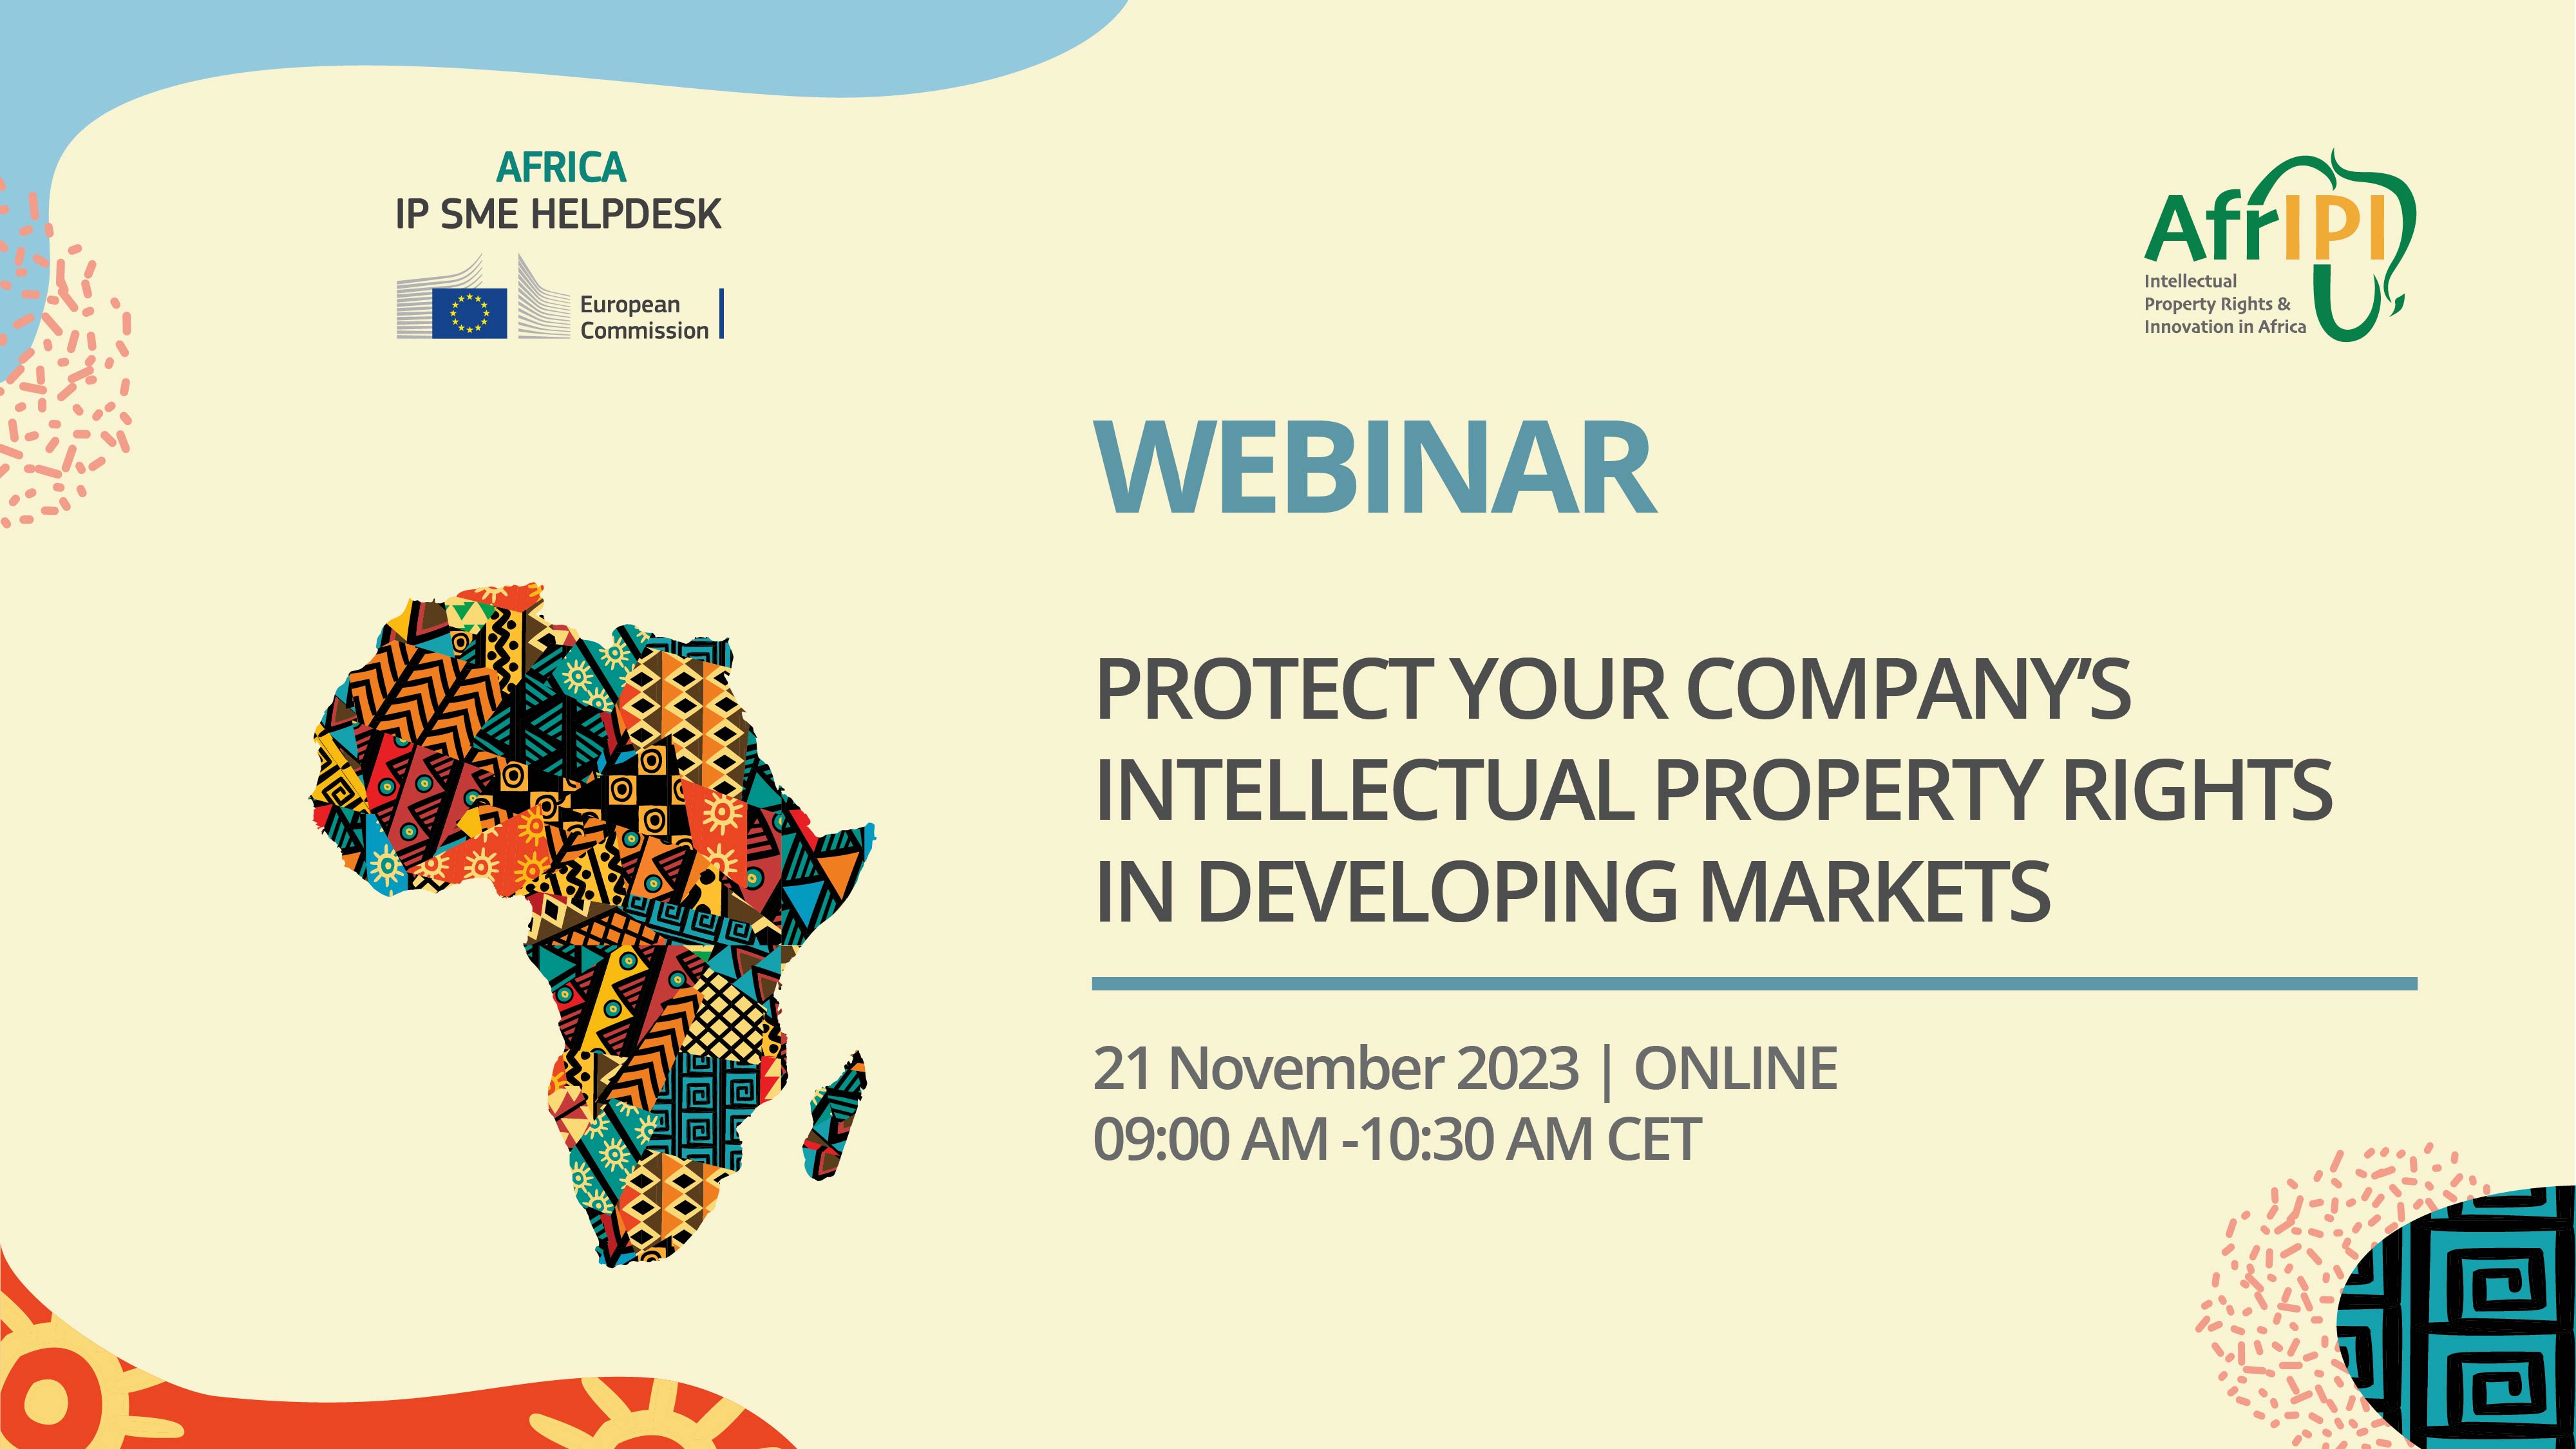 Protect your company’s intellectual property rights in developing markets